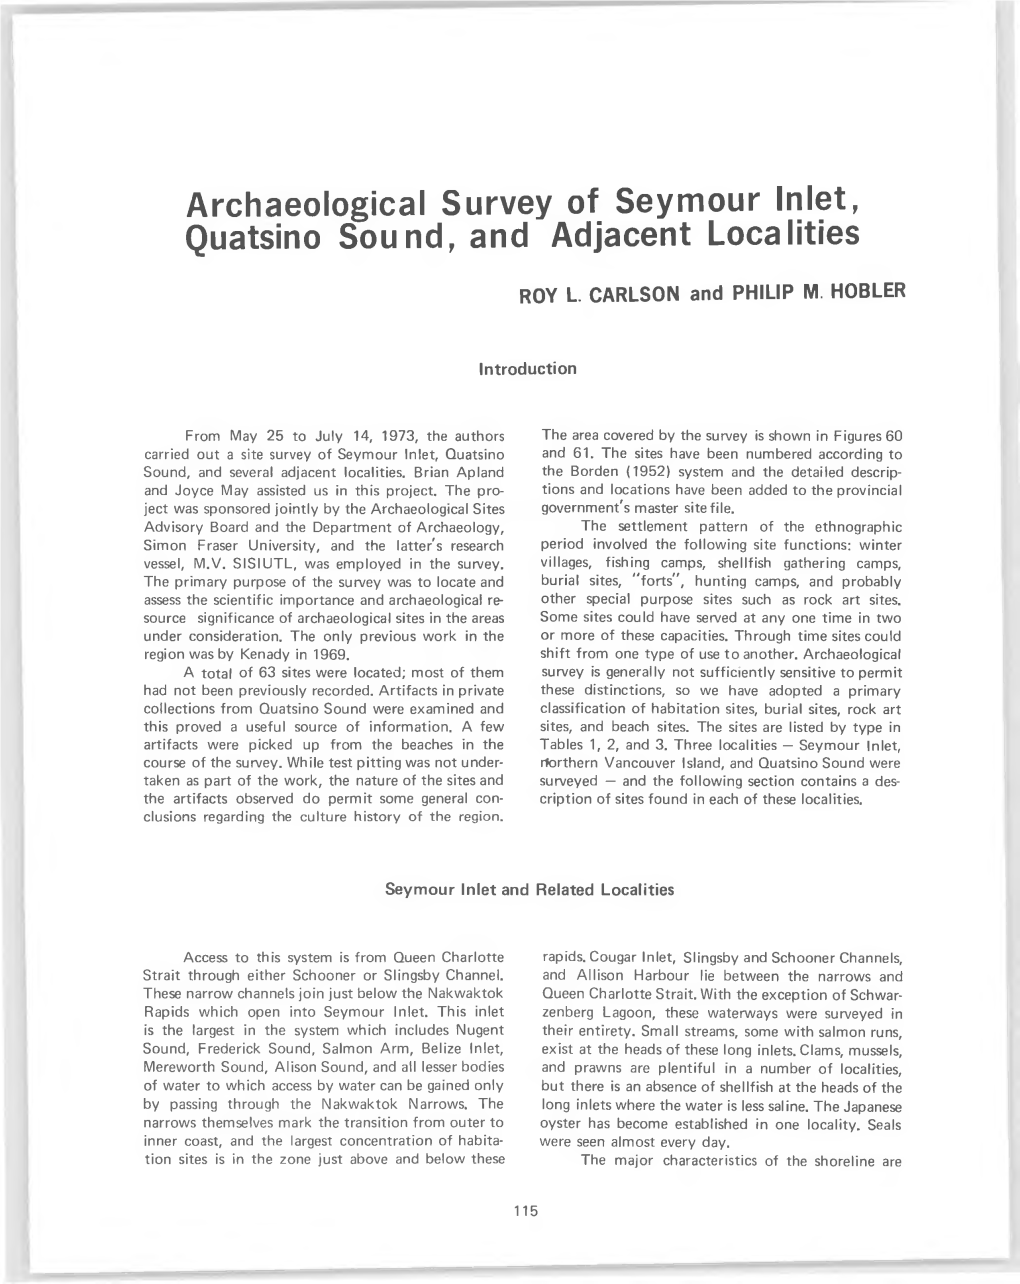 Archaeological Survey of Seymour Inlet, Quatsino Sound, and Adjacent Localities